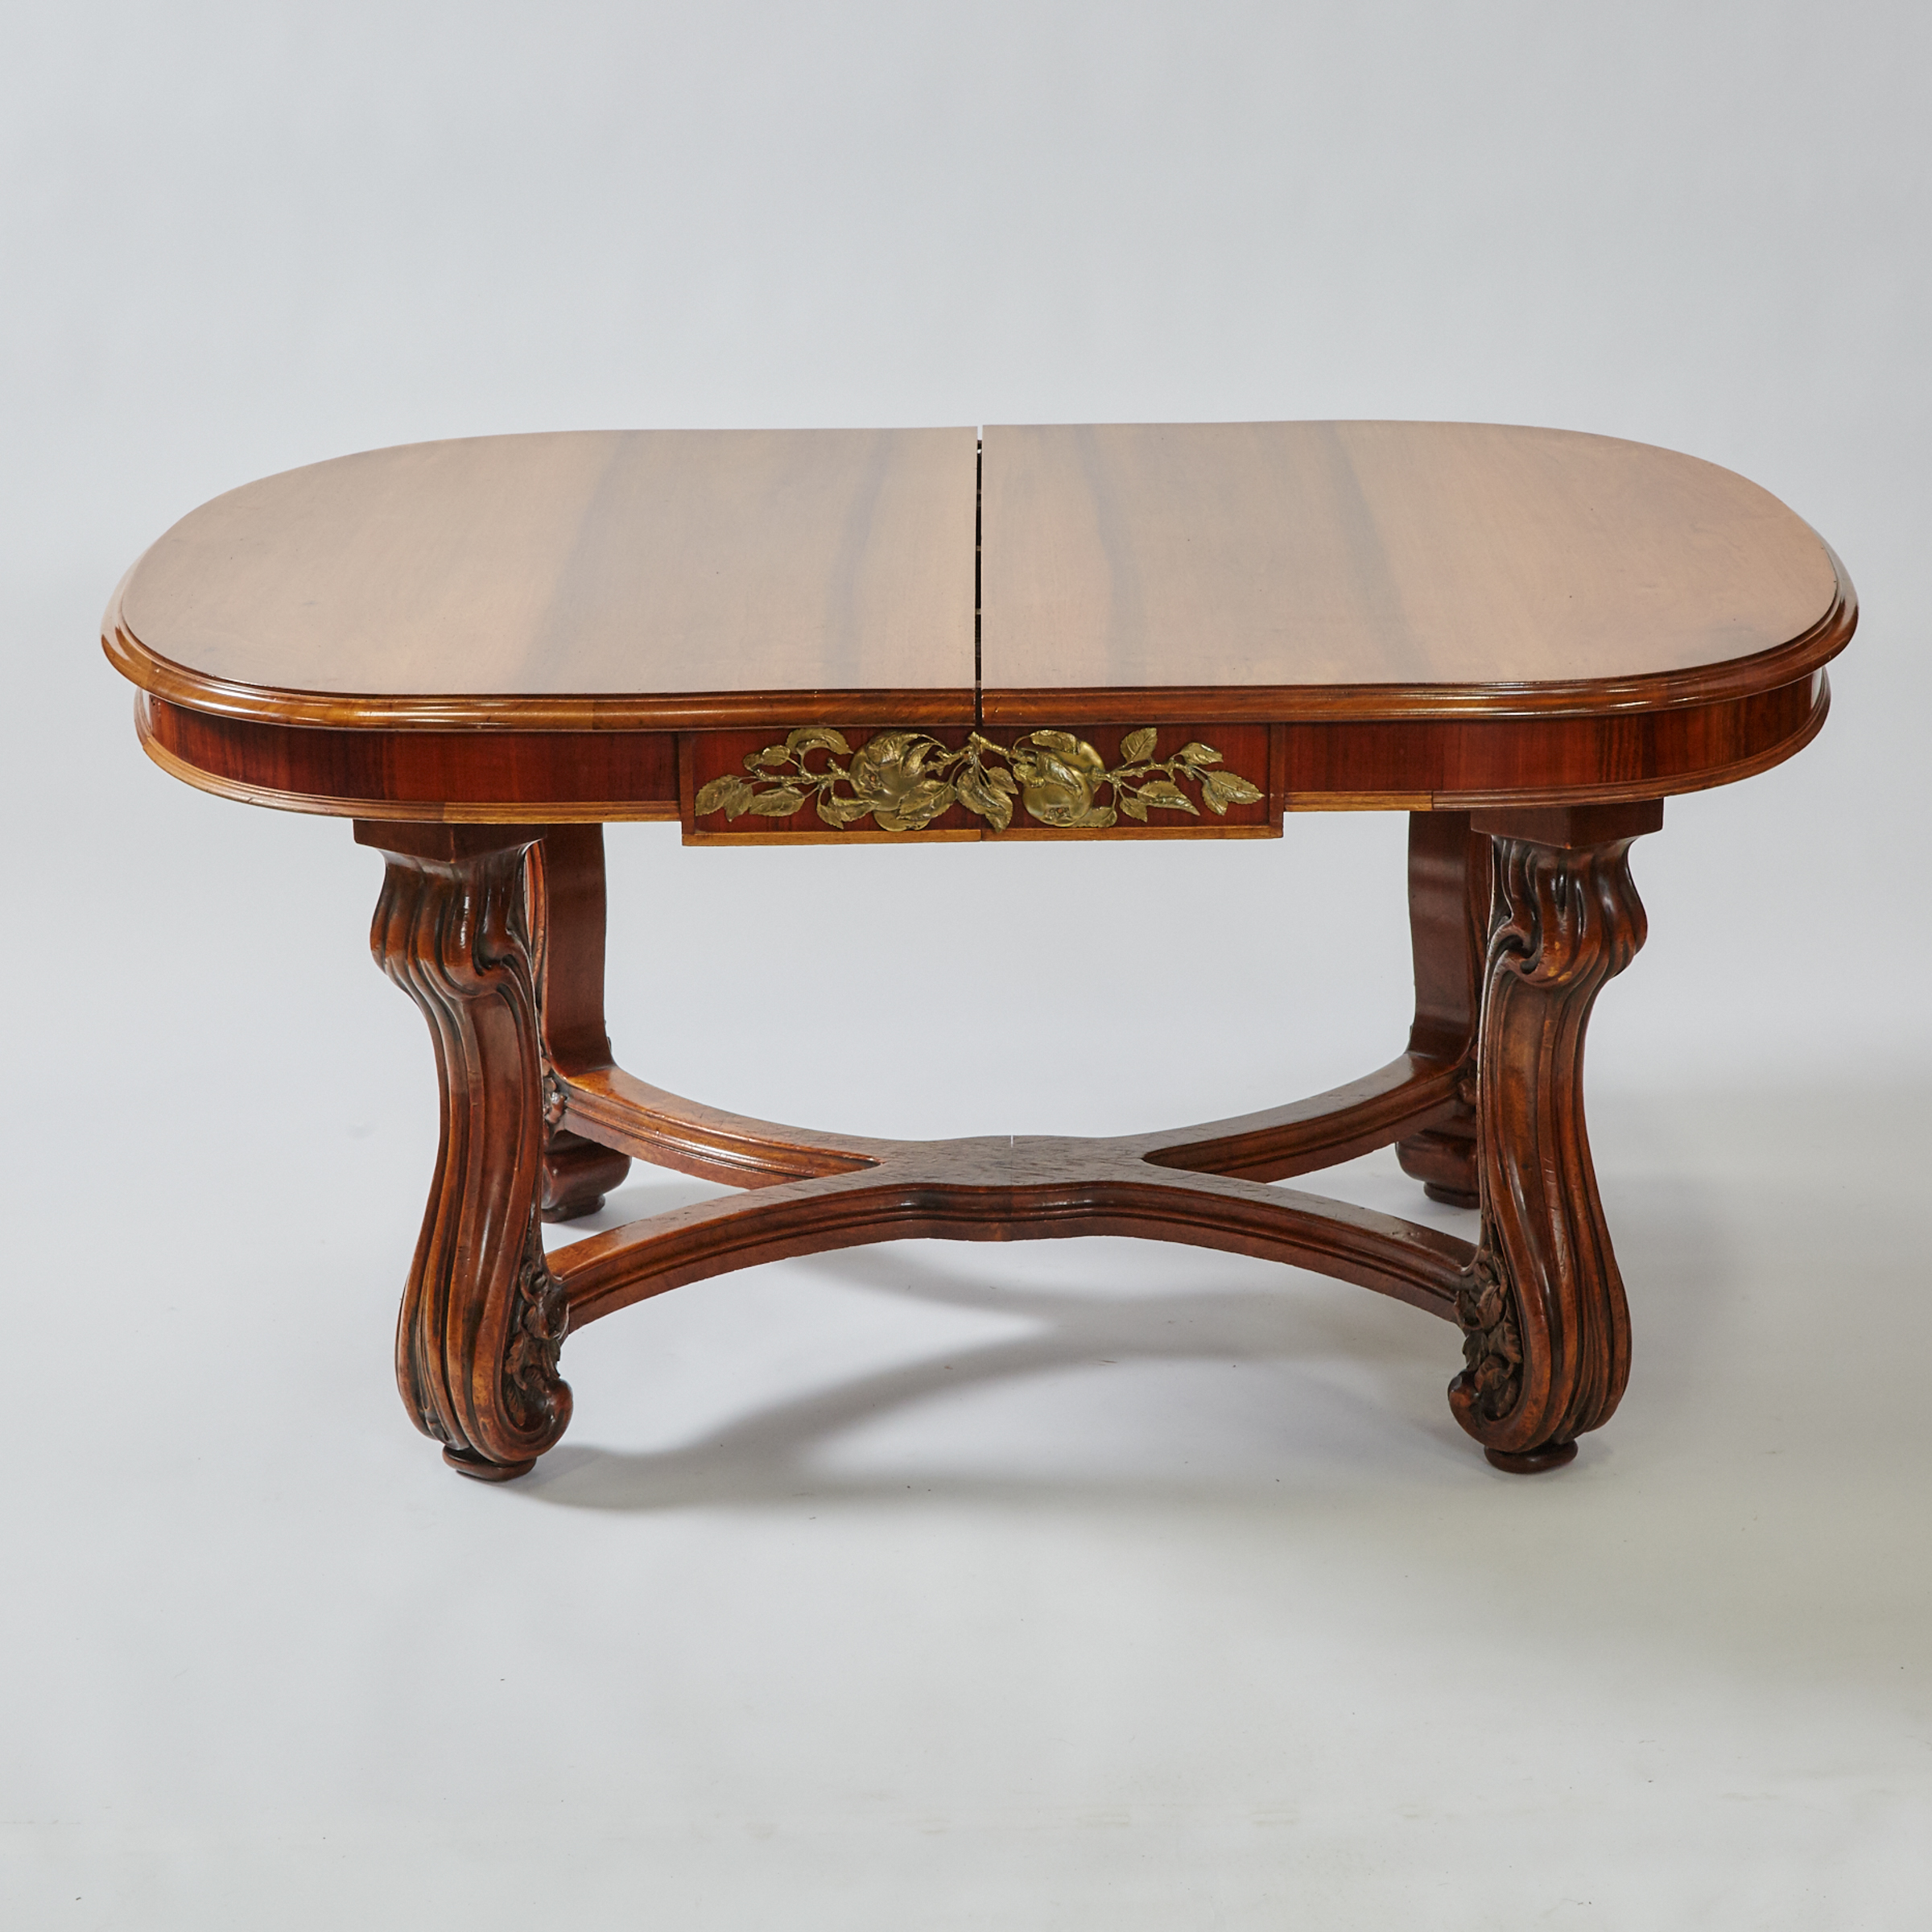 Louis Majorelle French Art Nouveau Ormolu Mounted Walnut and Rosewood Extension Dining Table, 19th/early 20th century